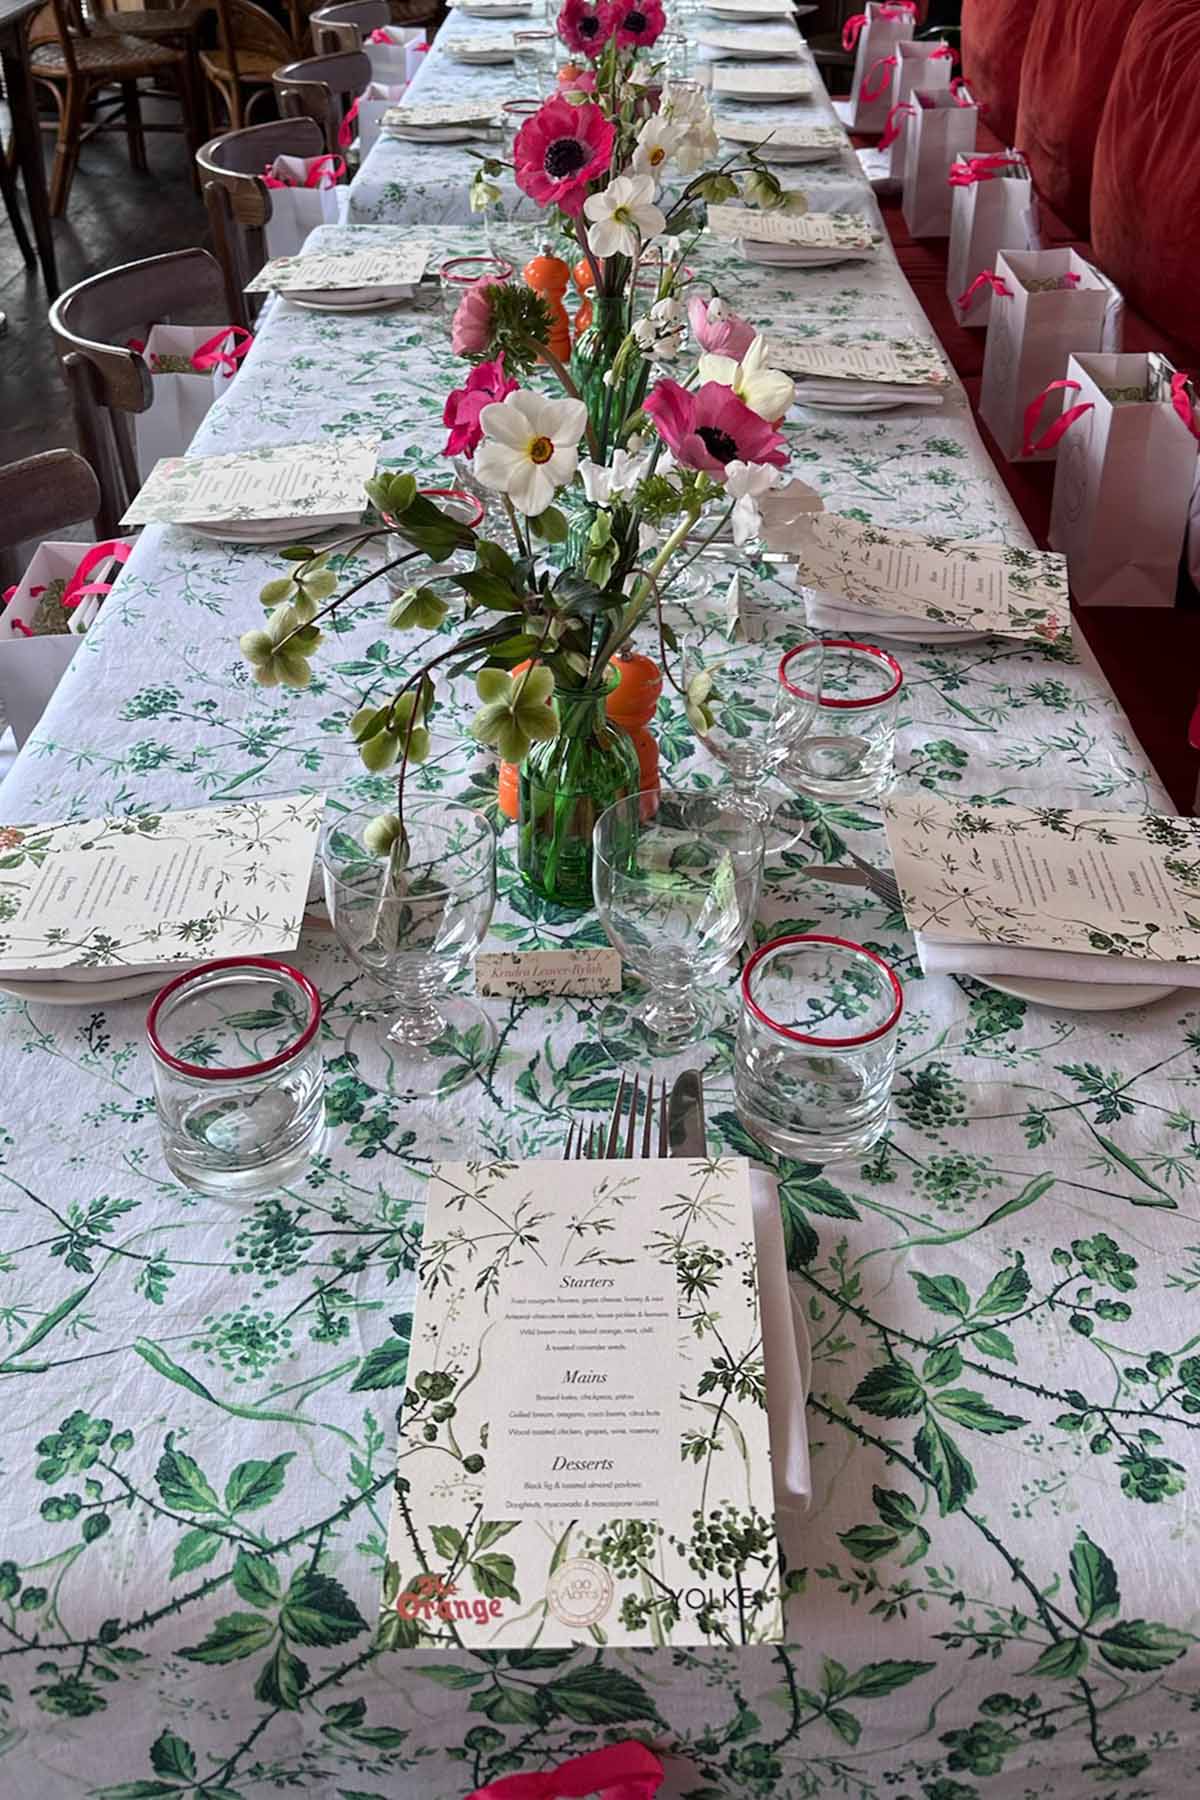 Set the spring table set with a linen tablecloth by YOLKE